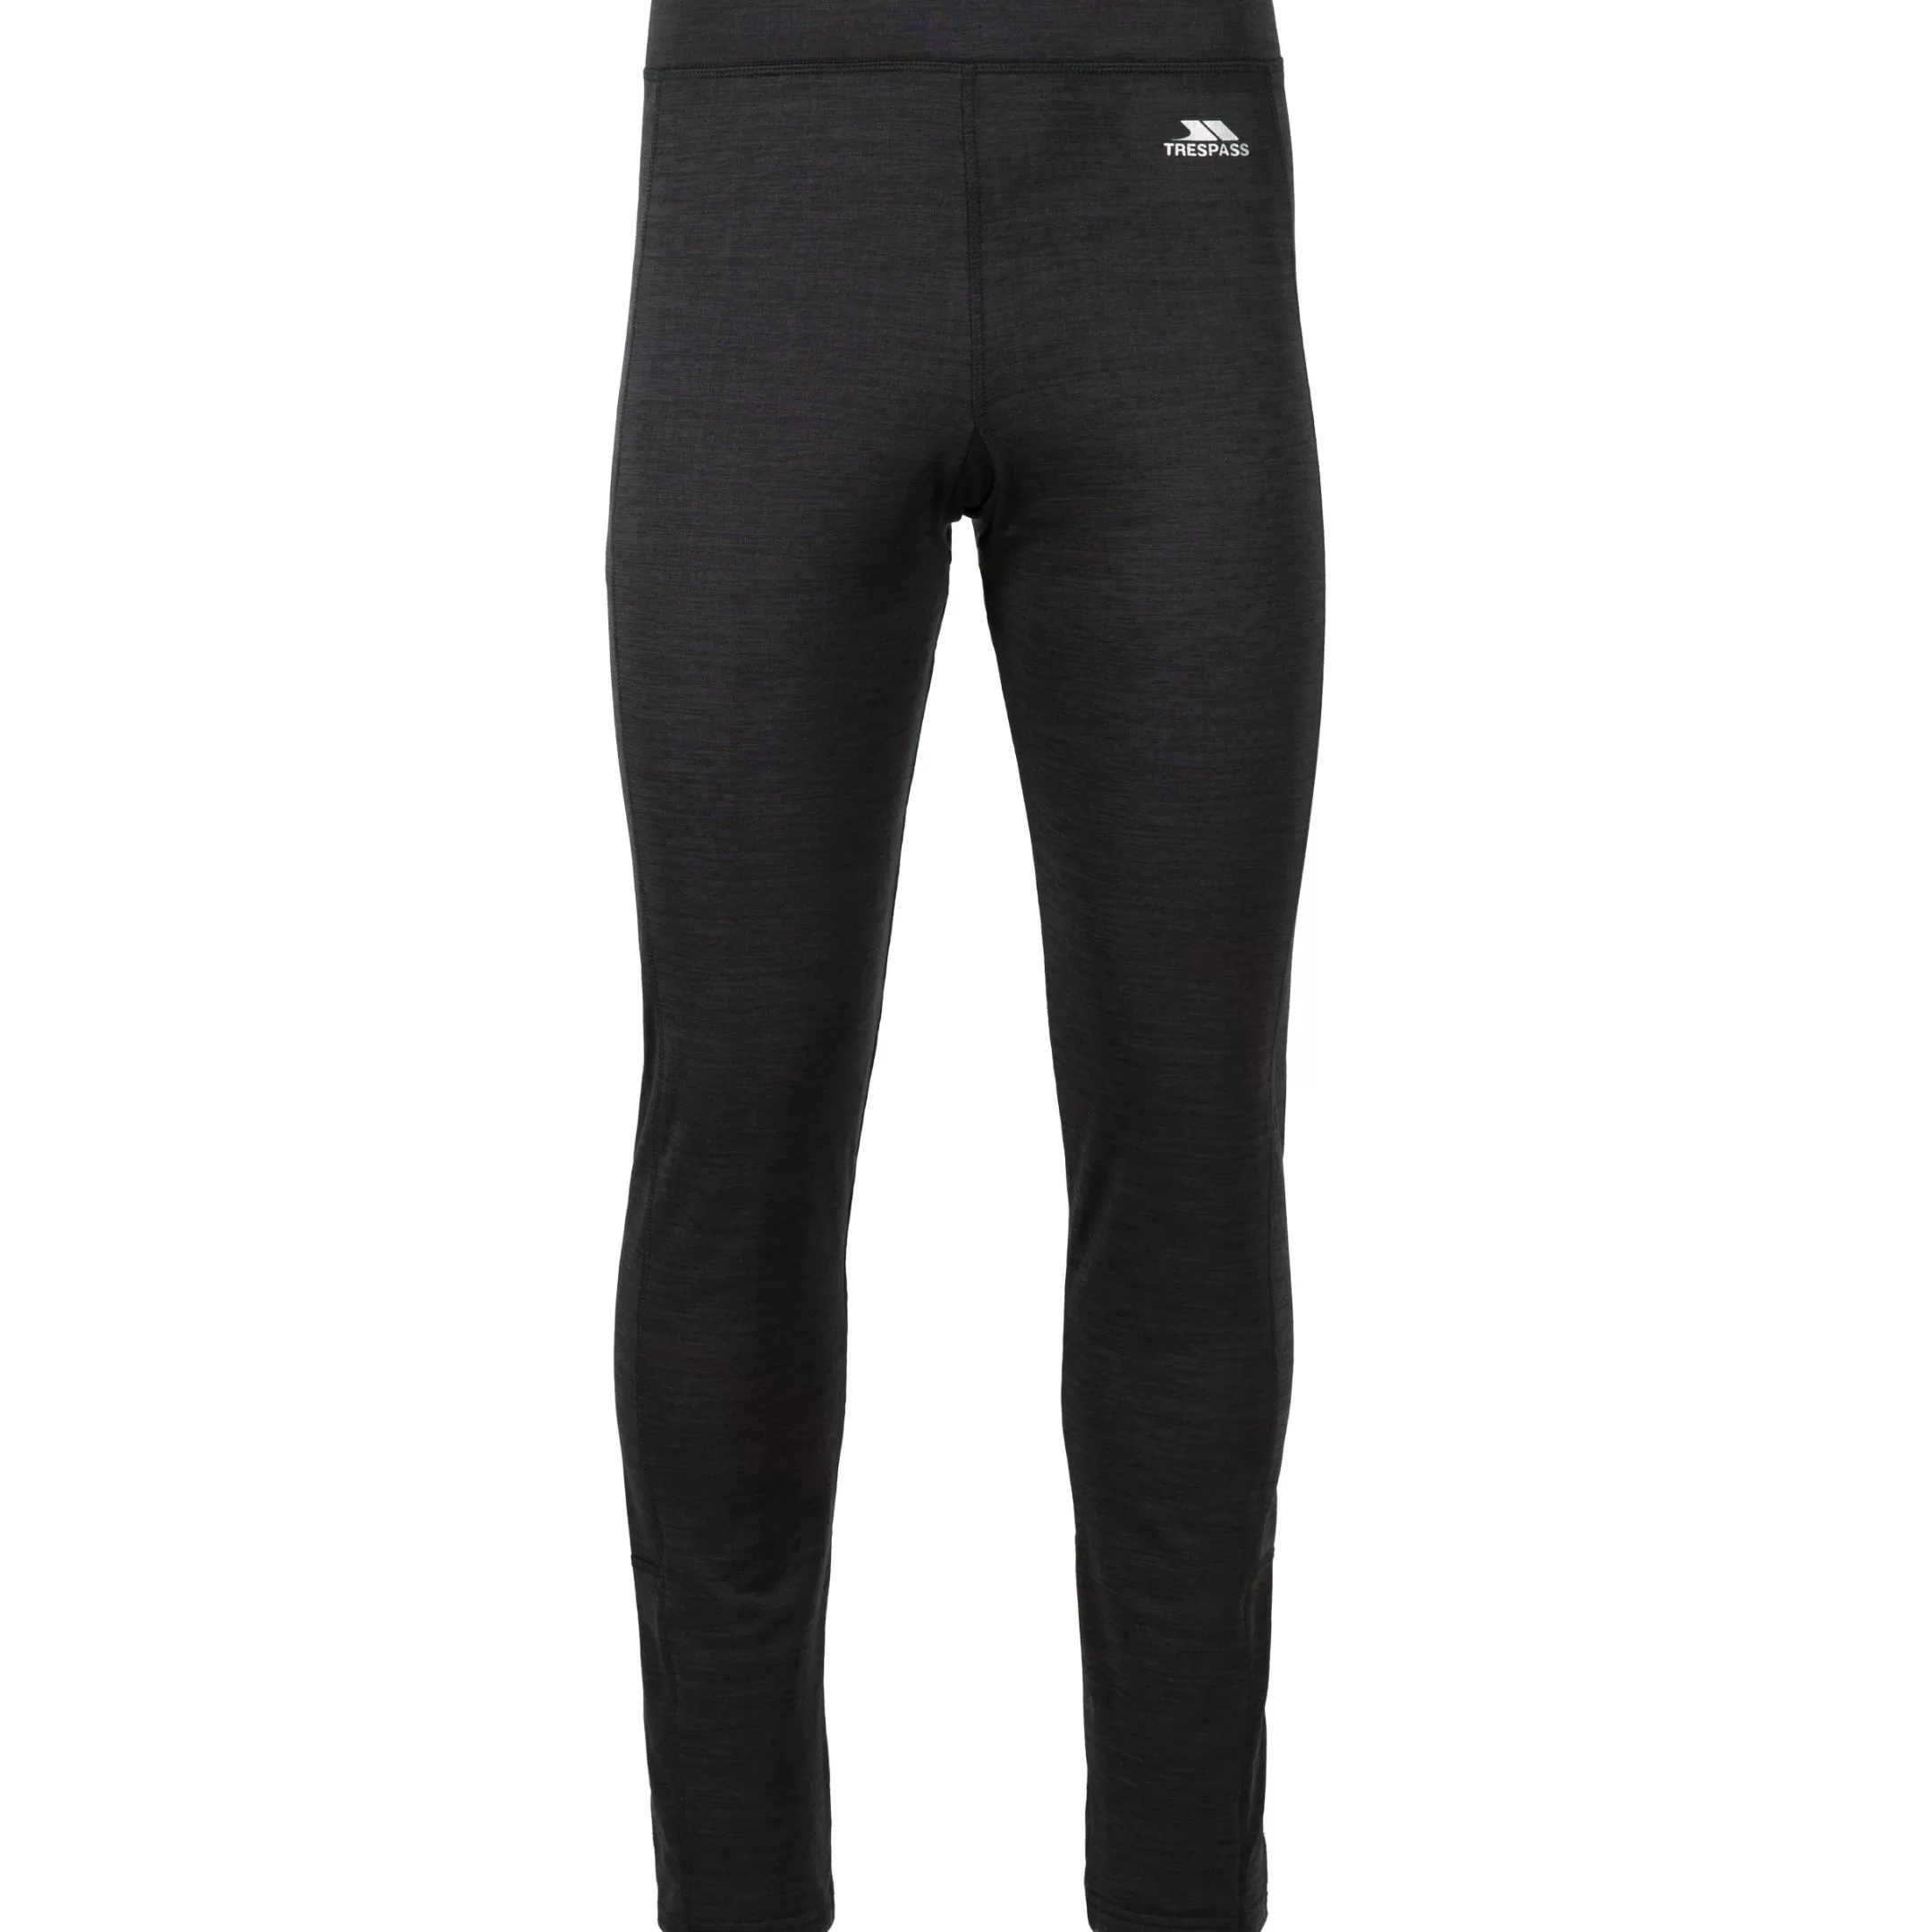 Mens Base Layer Bottoms Quick Dry Diego | Trespass New